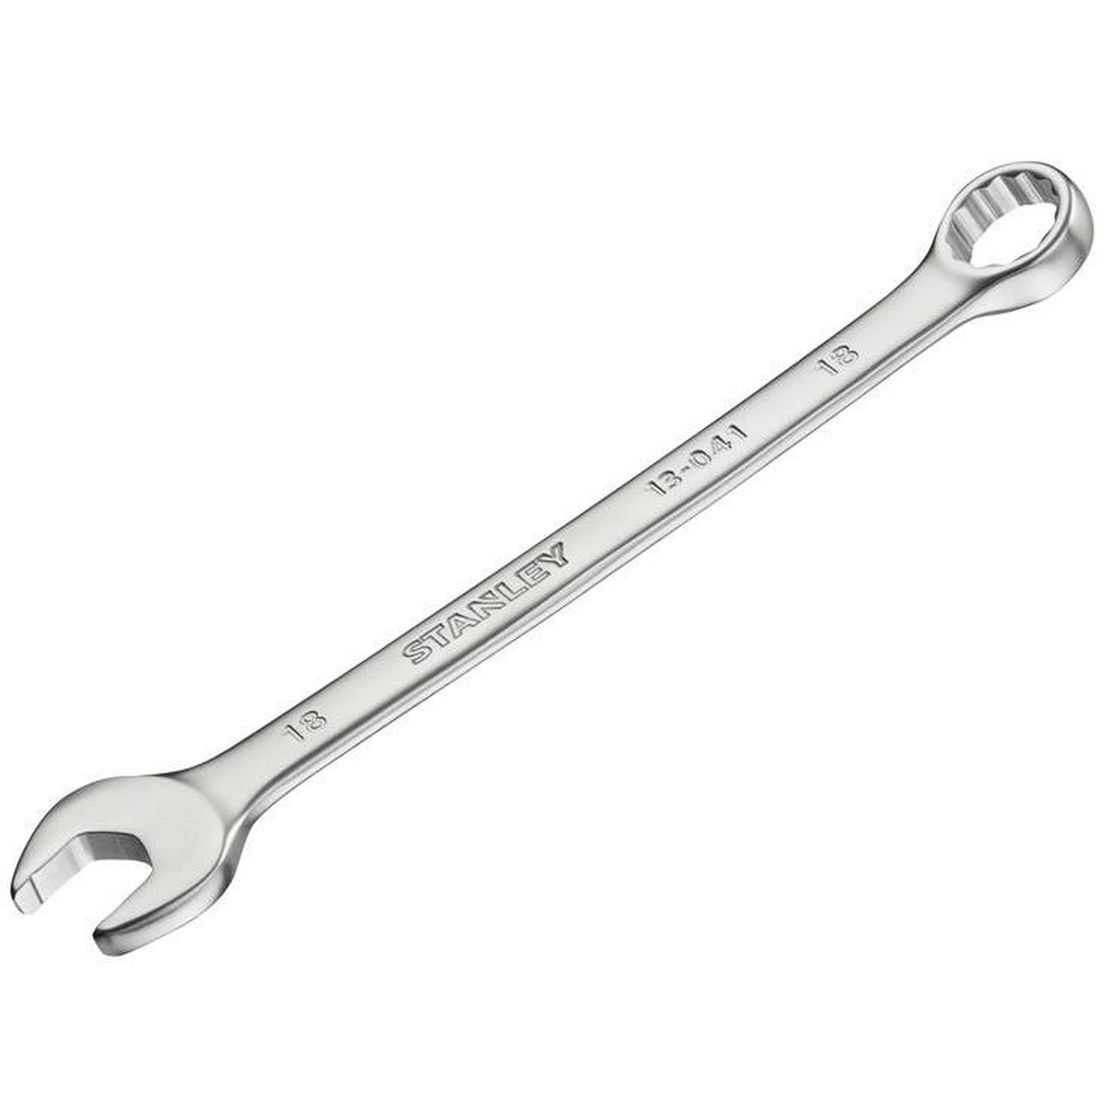 STANLEY FatMax Anti-Slip Combination Wrench 18mm                                       